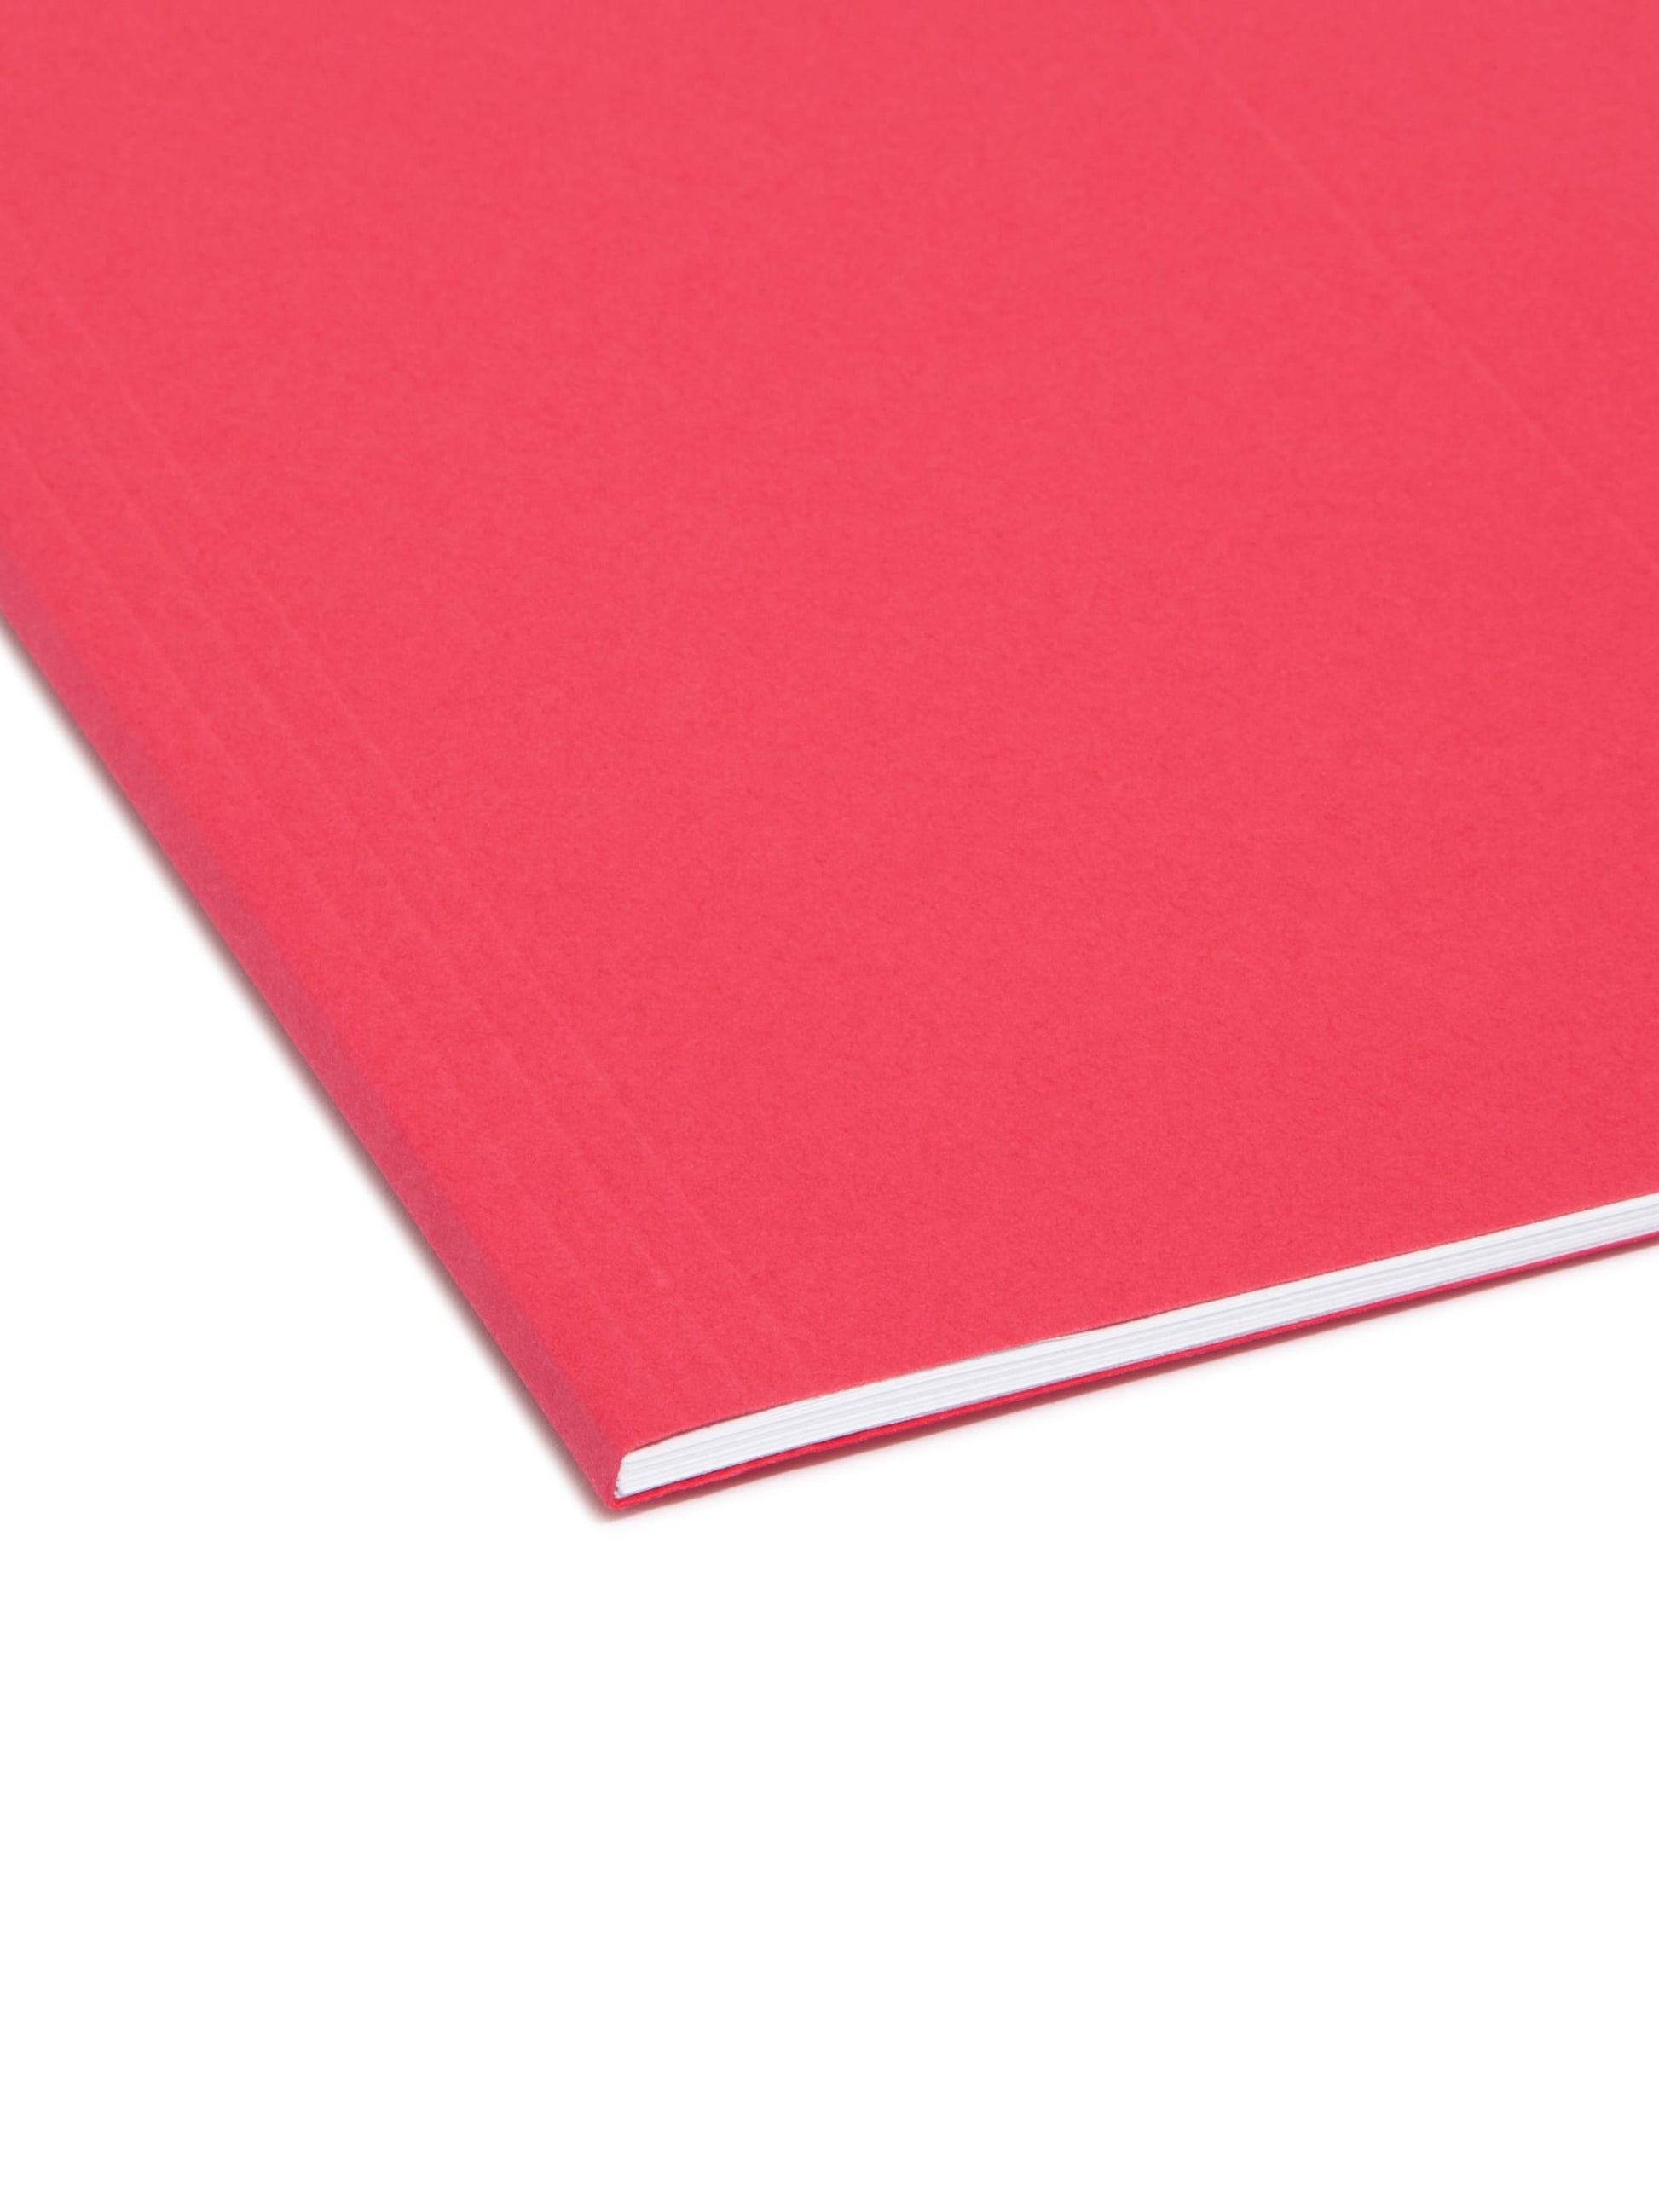 Standard Hanging File Folders with 1/5-Cut Tabs, Red Color, Letter Size, Set of 25, 086486640671